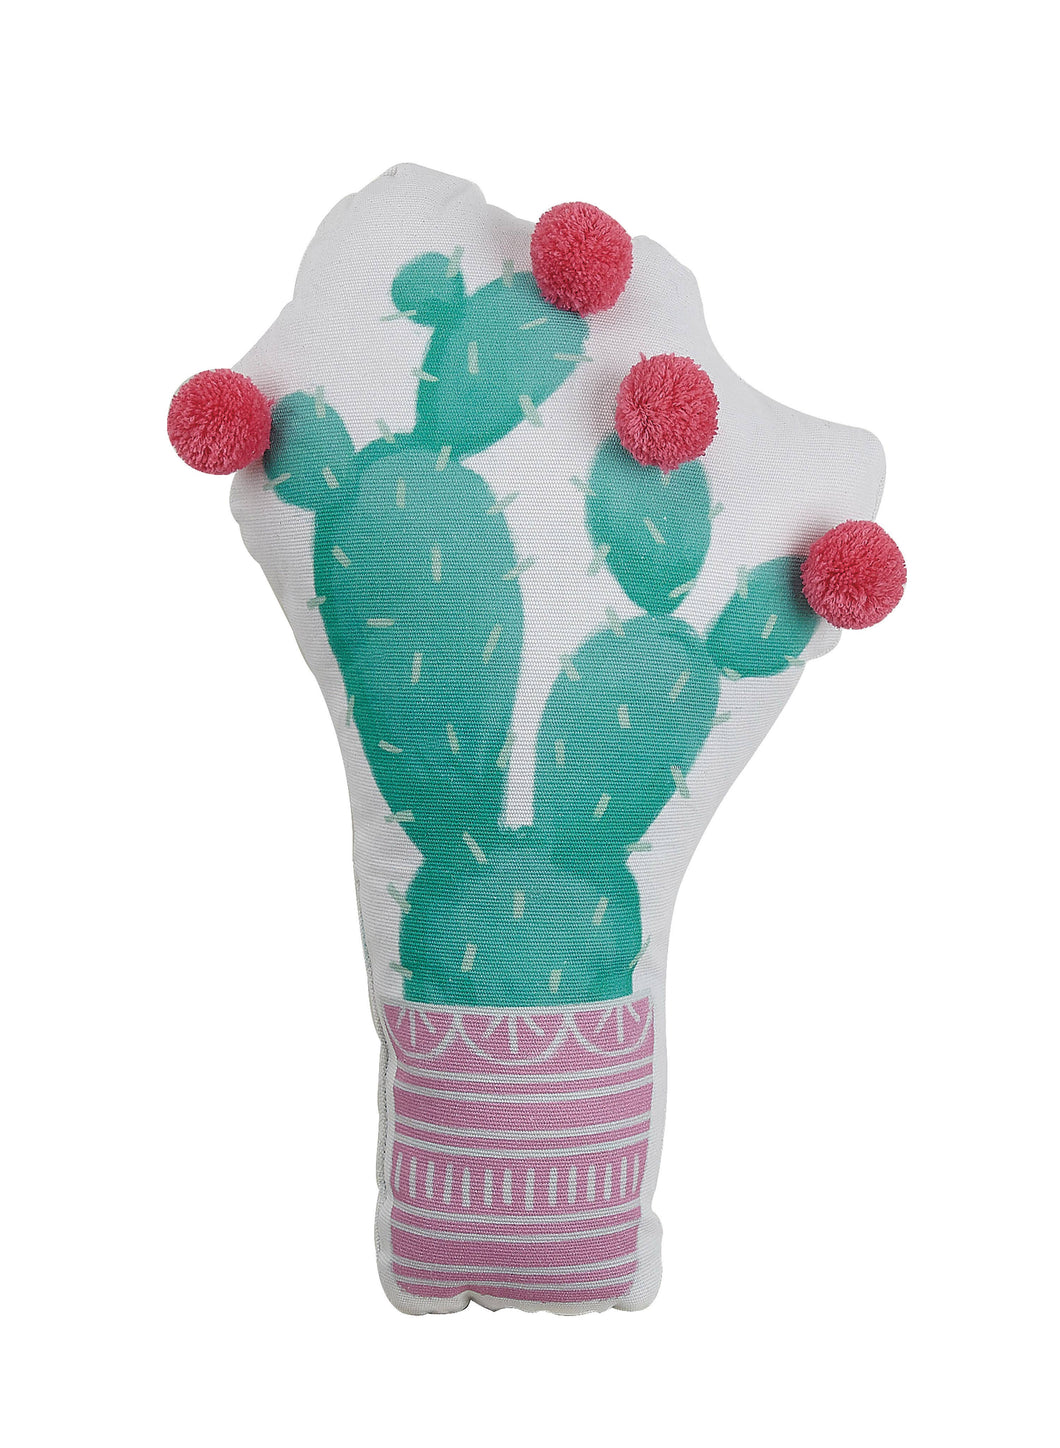 Prickly Pear Cactus Shaped Printed Pillow